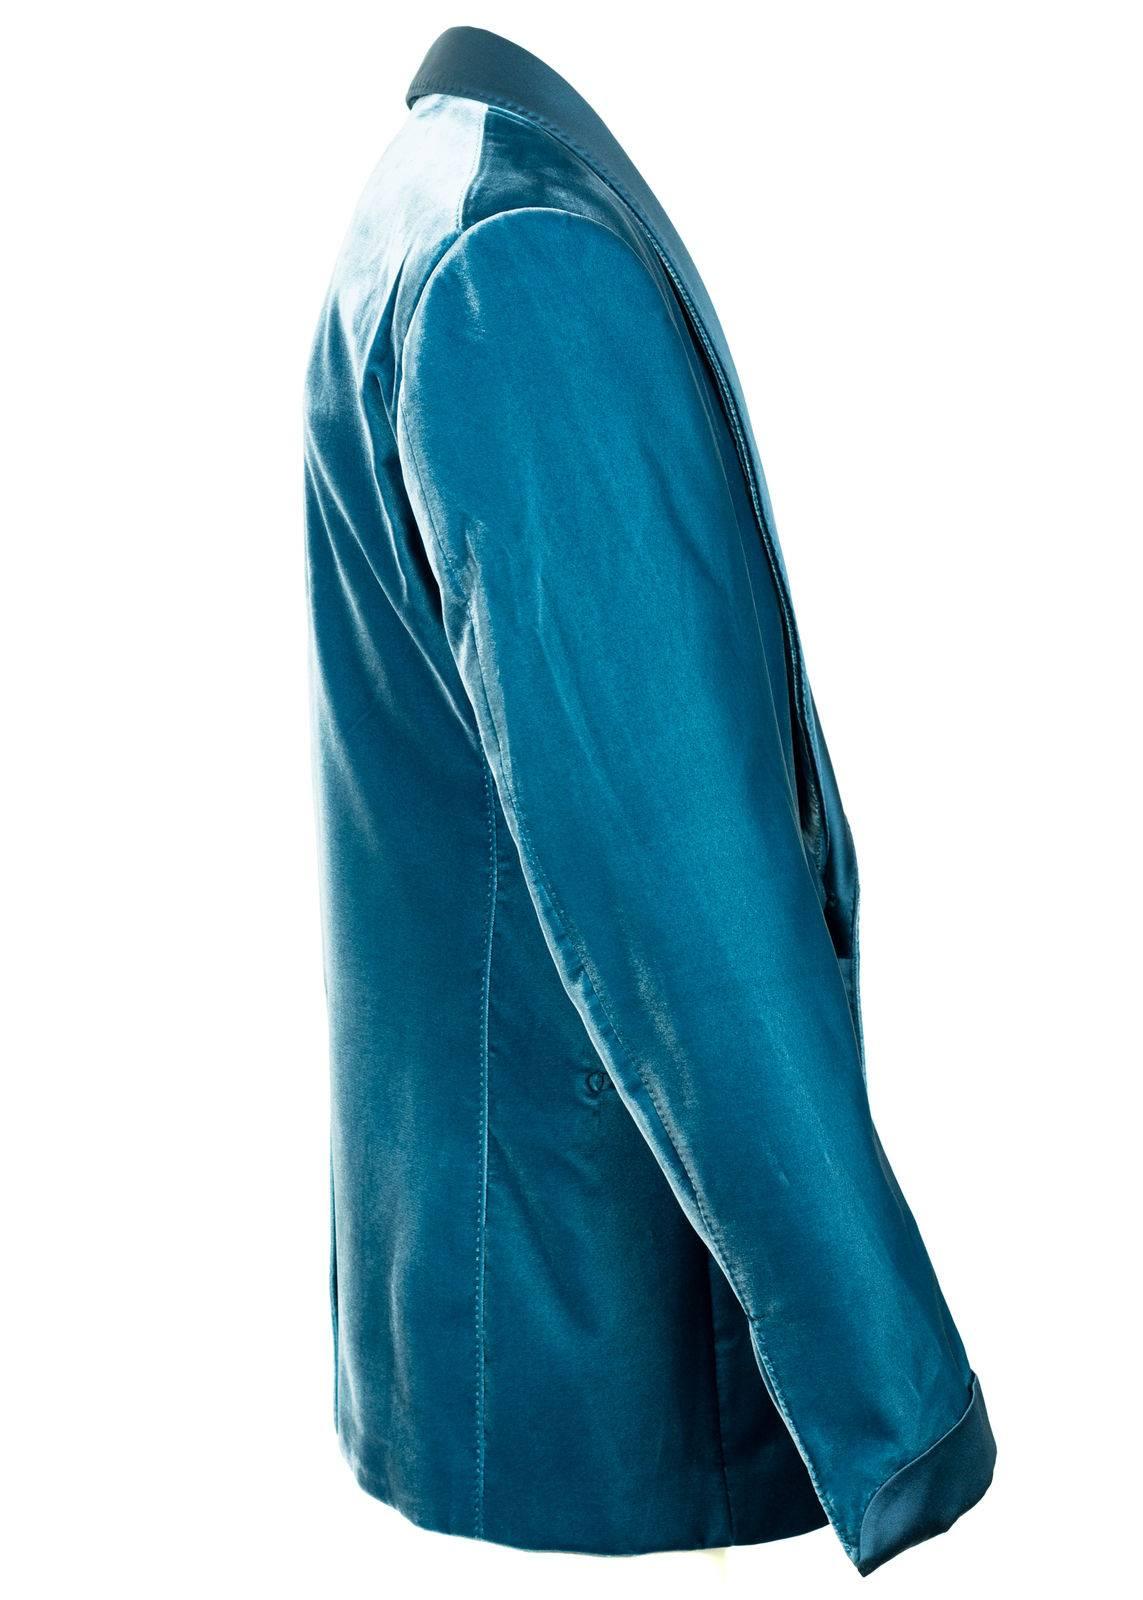 Tom Ford Aqua Blue Velvet Shawl Lapel Shelton Cocktail Jacket Sz46R/36R RTL$3980 In Excellent Condition For Sale In Brooklyn, NY